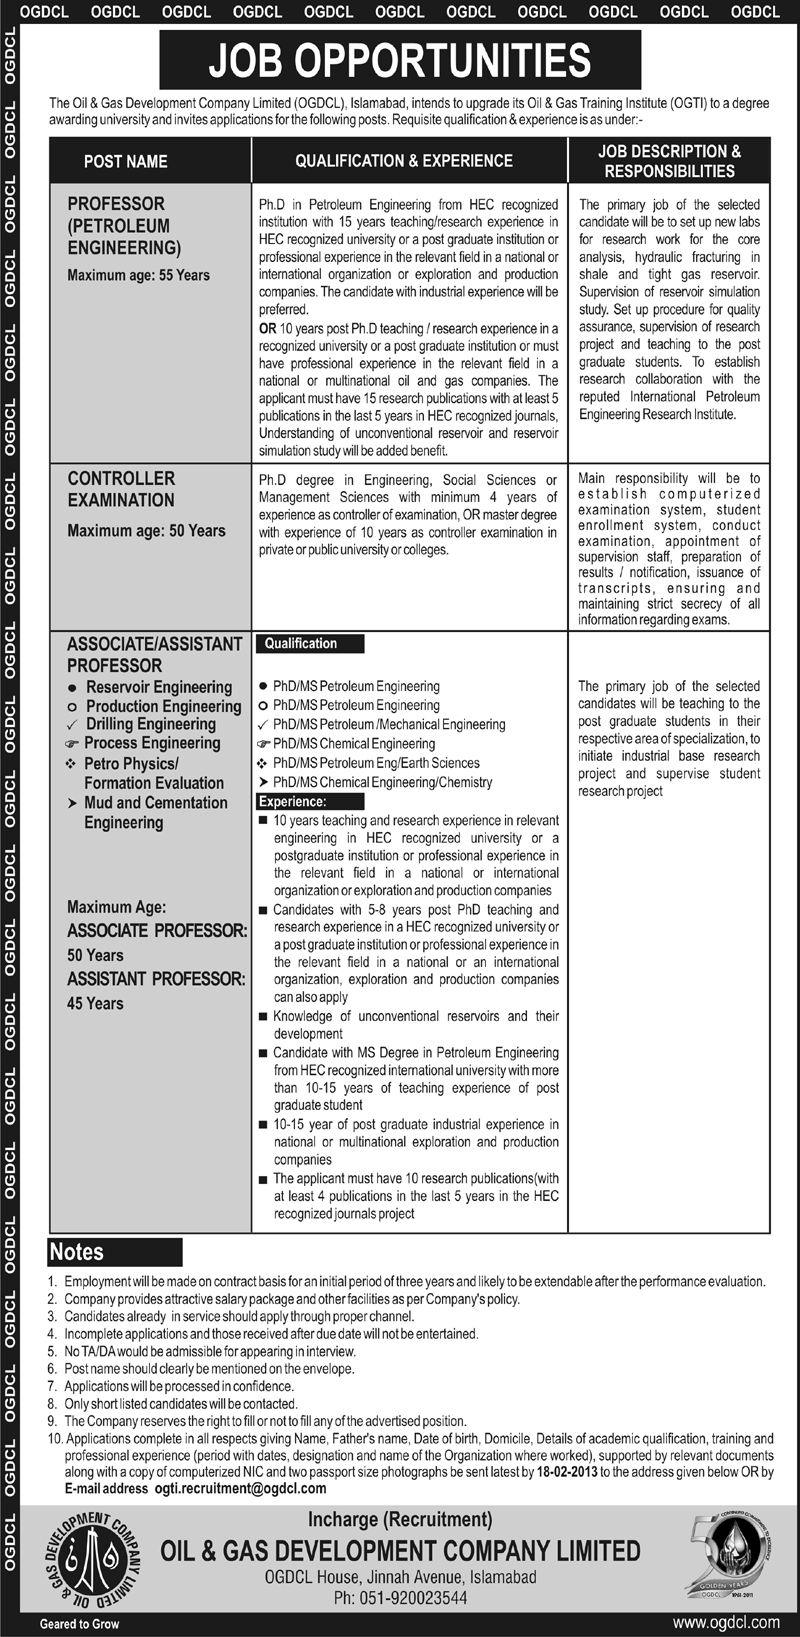 OGTI Islamabad Jobs 2013 for Associate / Assistant / Professors & Controller Examination